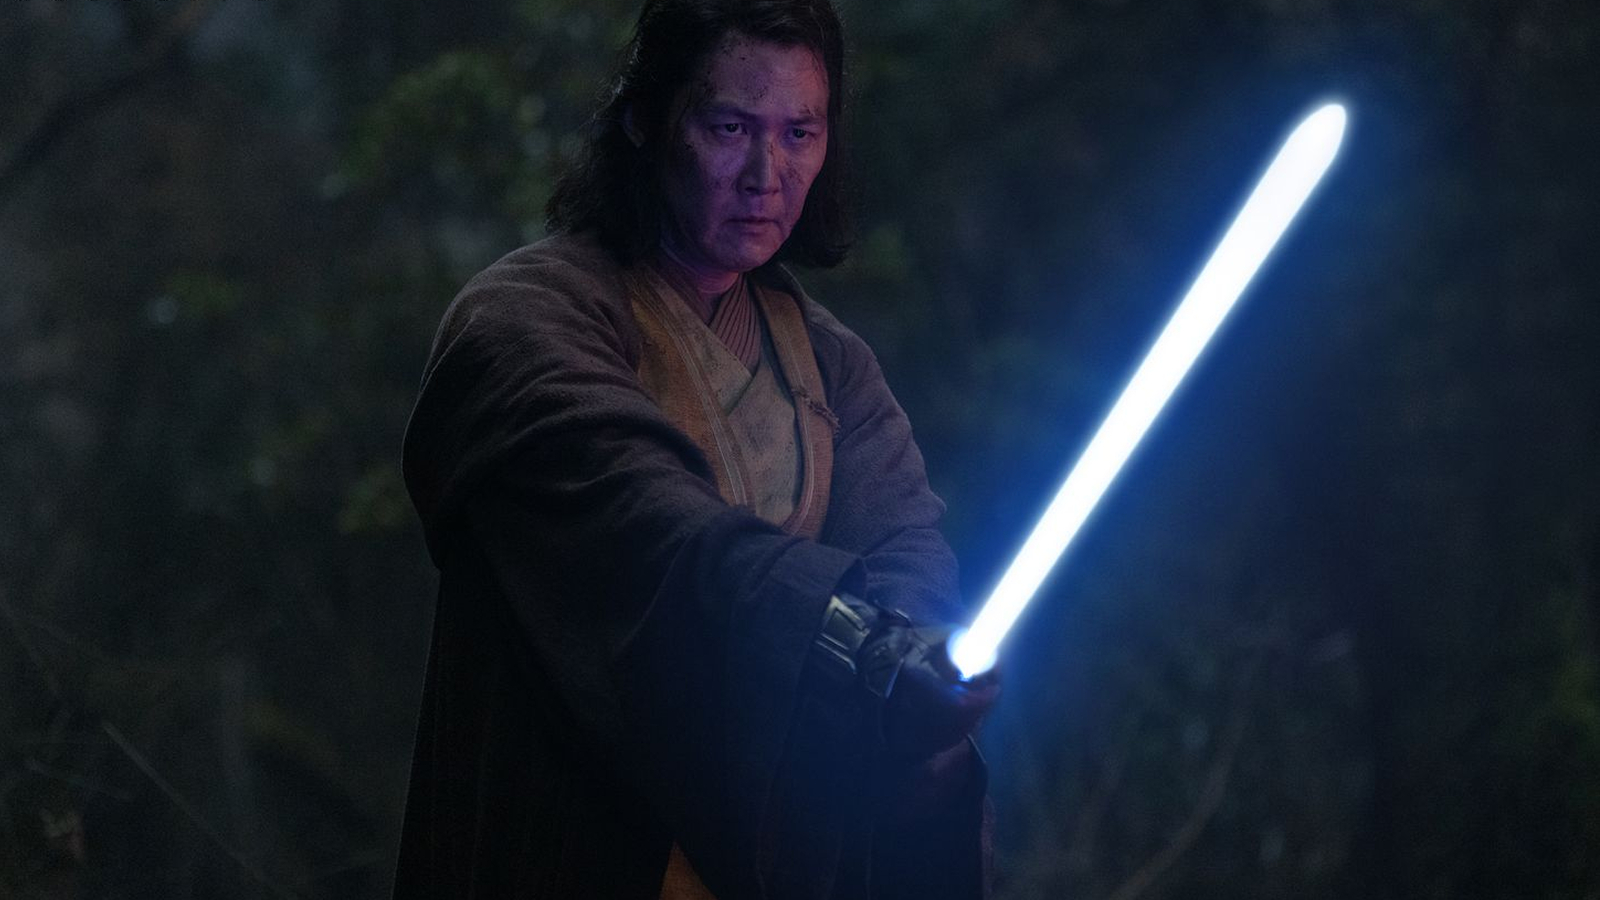 Master Sol poses with his lightsaber in The Acolyte Season 1, Episode 5